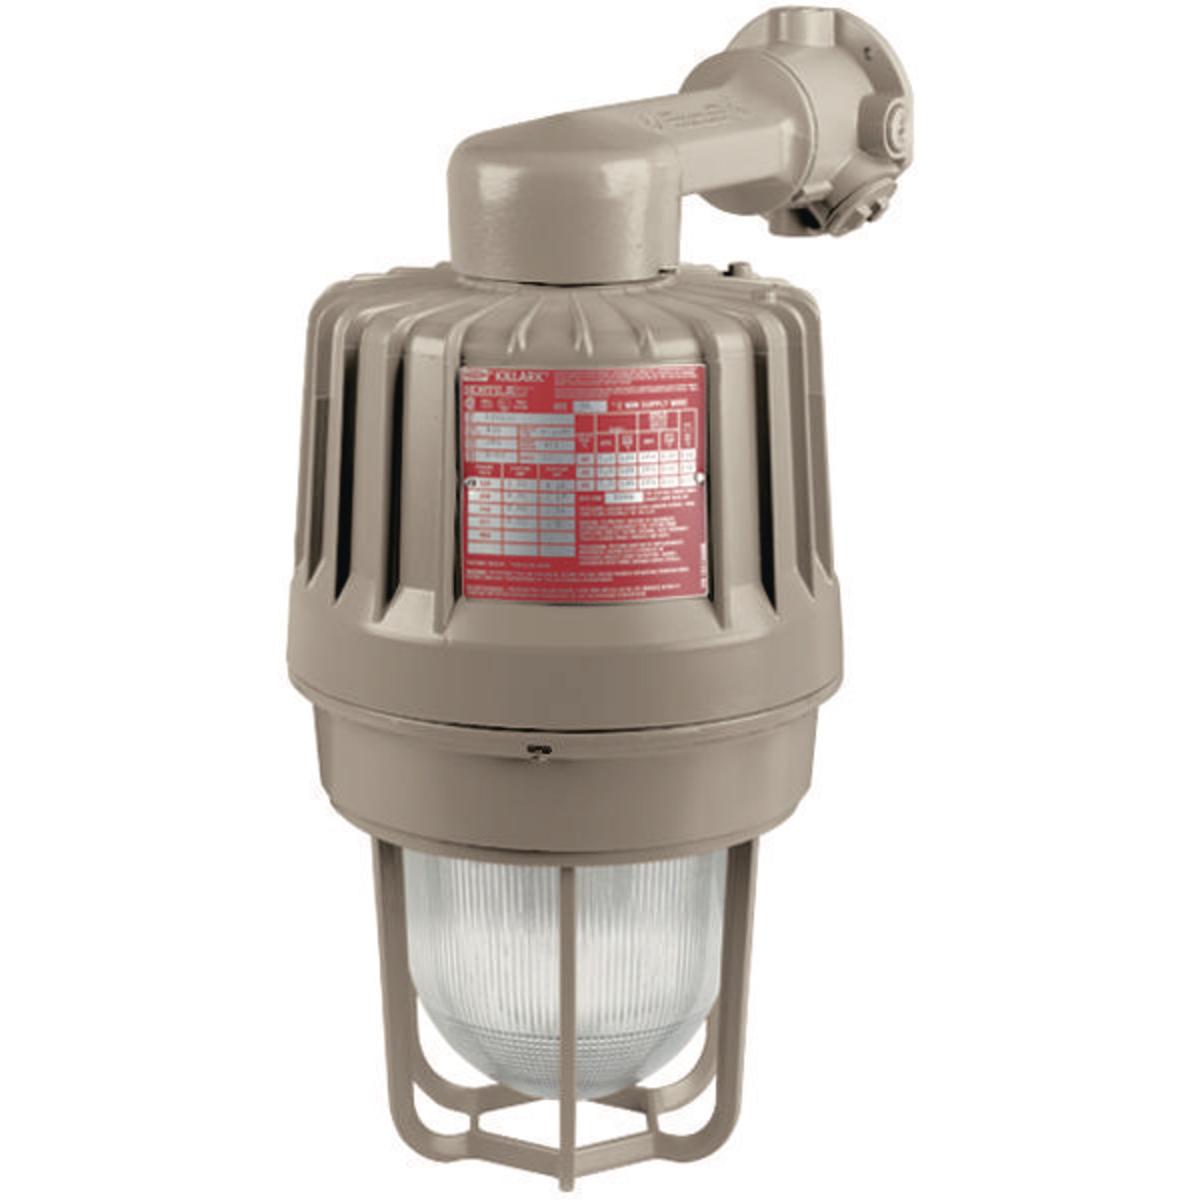 Hubbell EZP256B2G 250W 120/277/347V Pulse-Start Metal Halide Wall Mount with Guard  ; Three light sources – High Pressure Sodium (50-400W), Metal Halide (70-400W) and Pulse Start Metal Halide (175-400W) ; Mounting choice –Pendant, ceiling, 25˚ stanchion or 90˚ wall mount, 